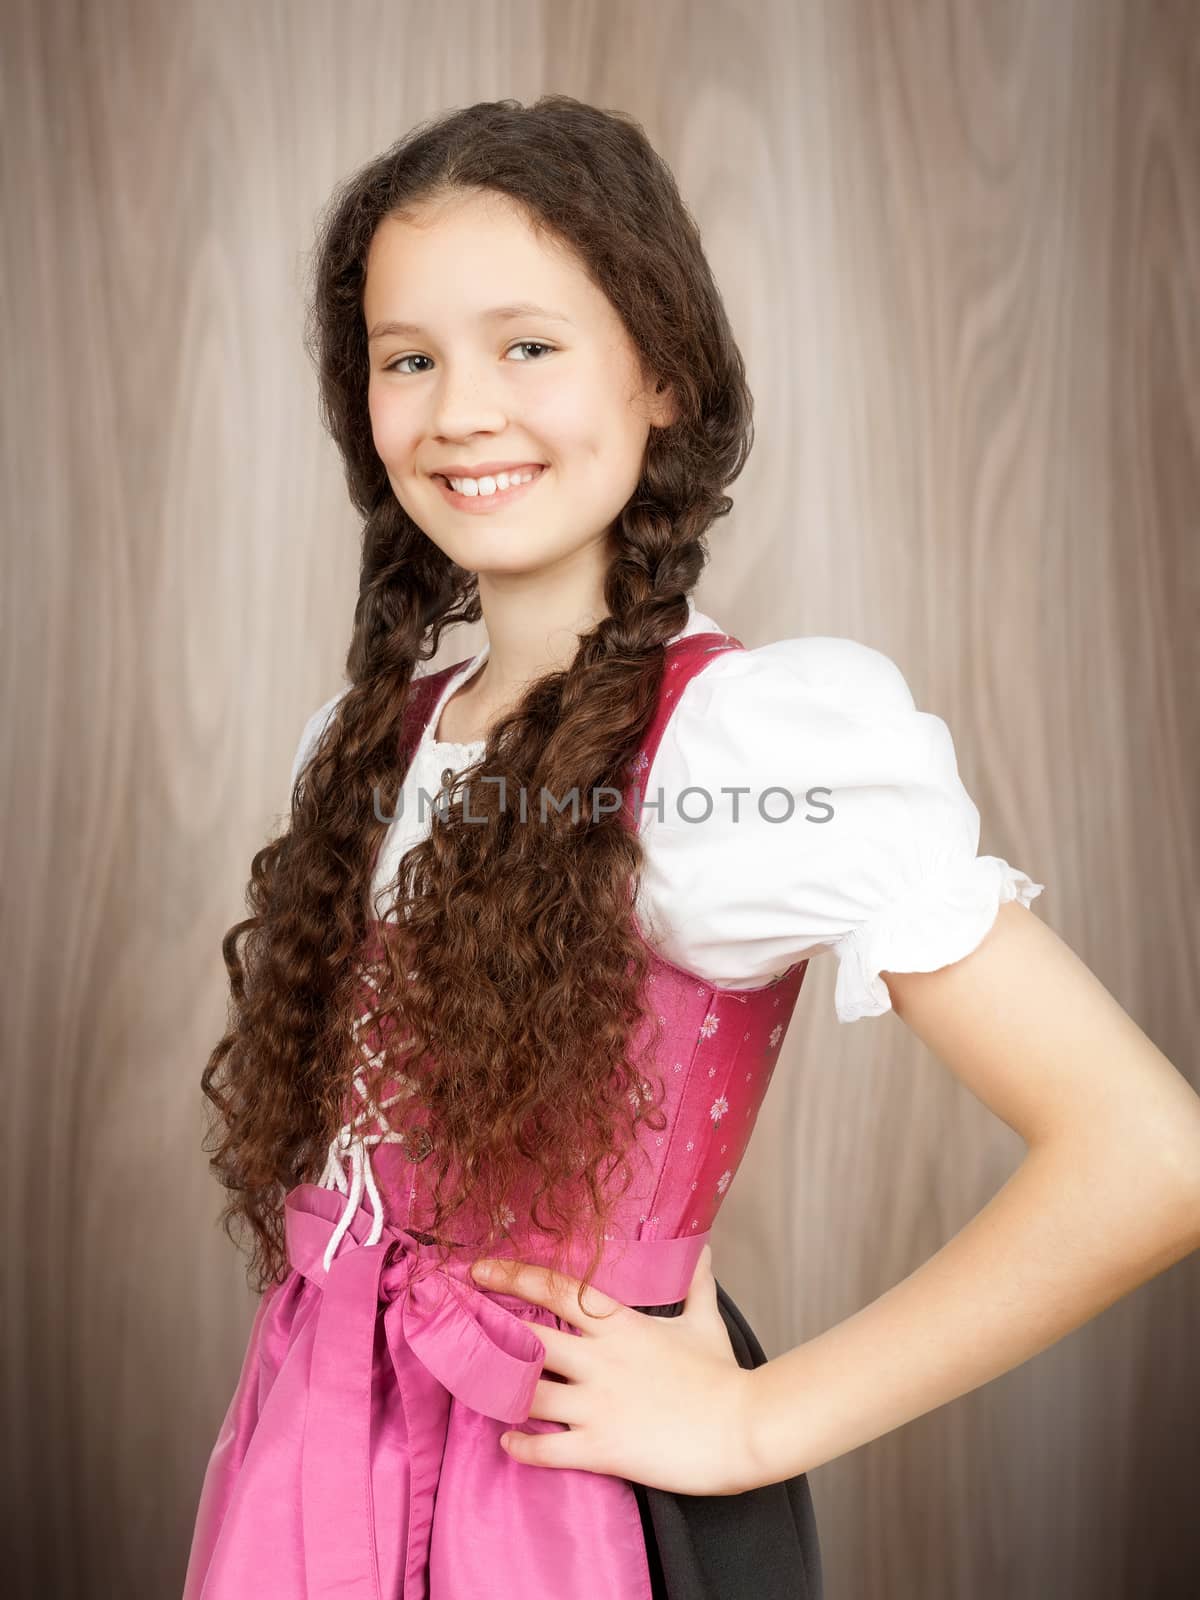 A sweet traditional bavarian girl in front of a wooden background